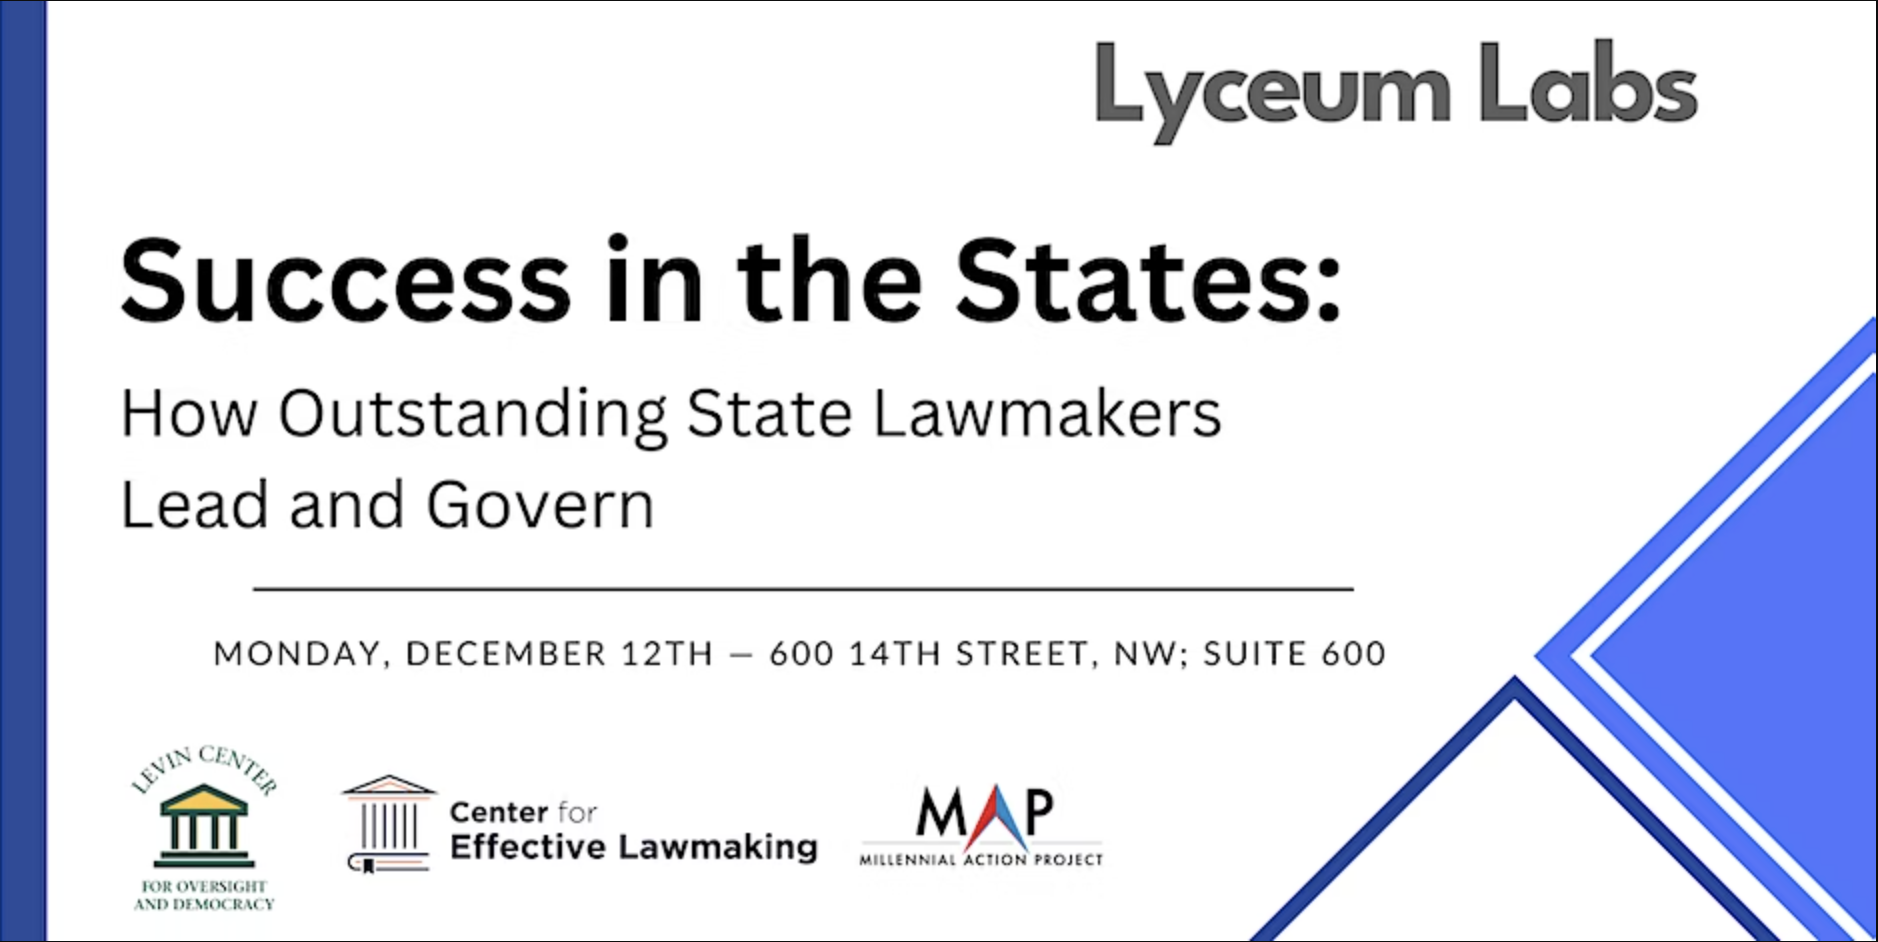 Success in the States: How Outstanding State Lawmakers Lead and Govern